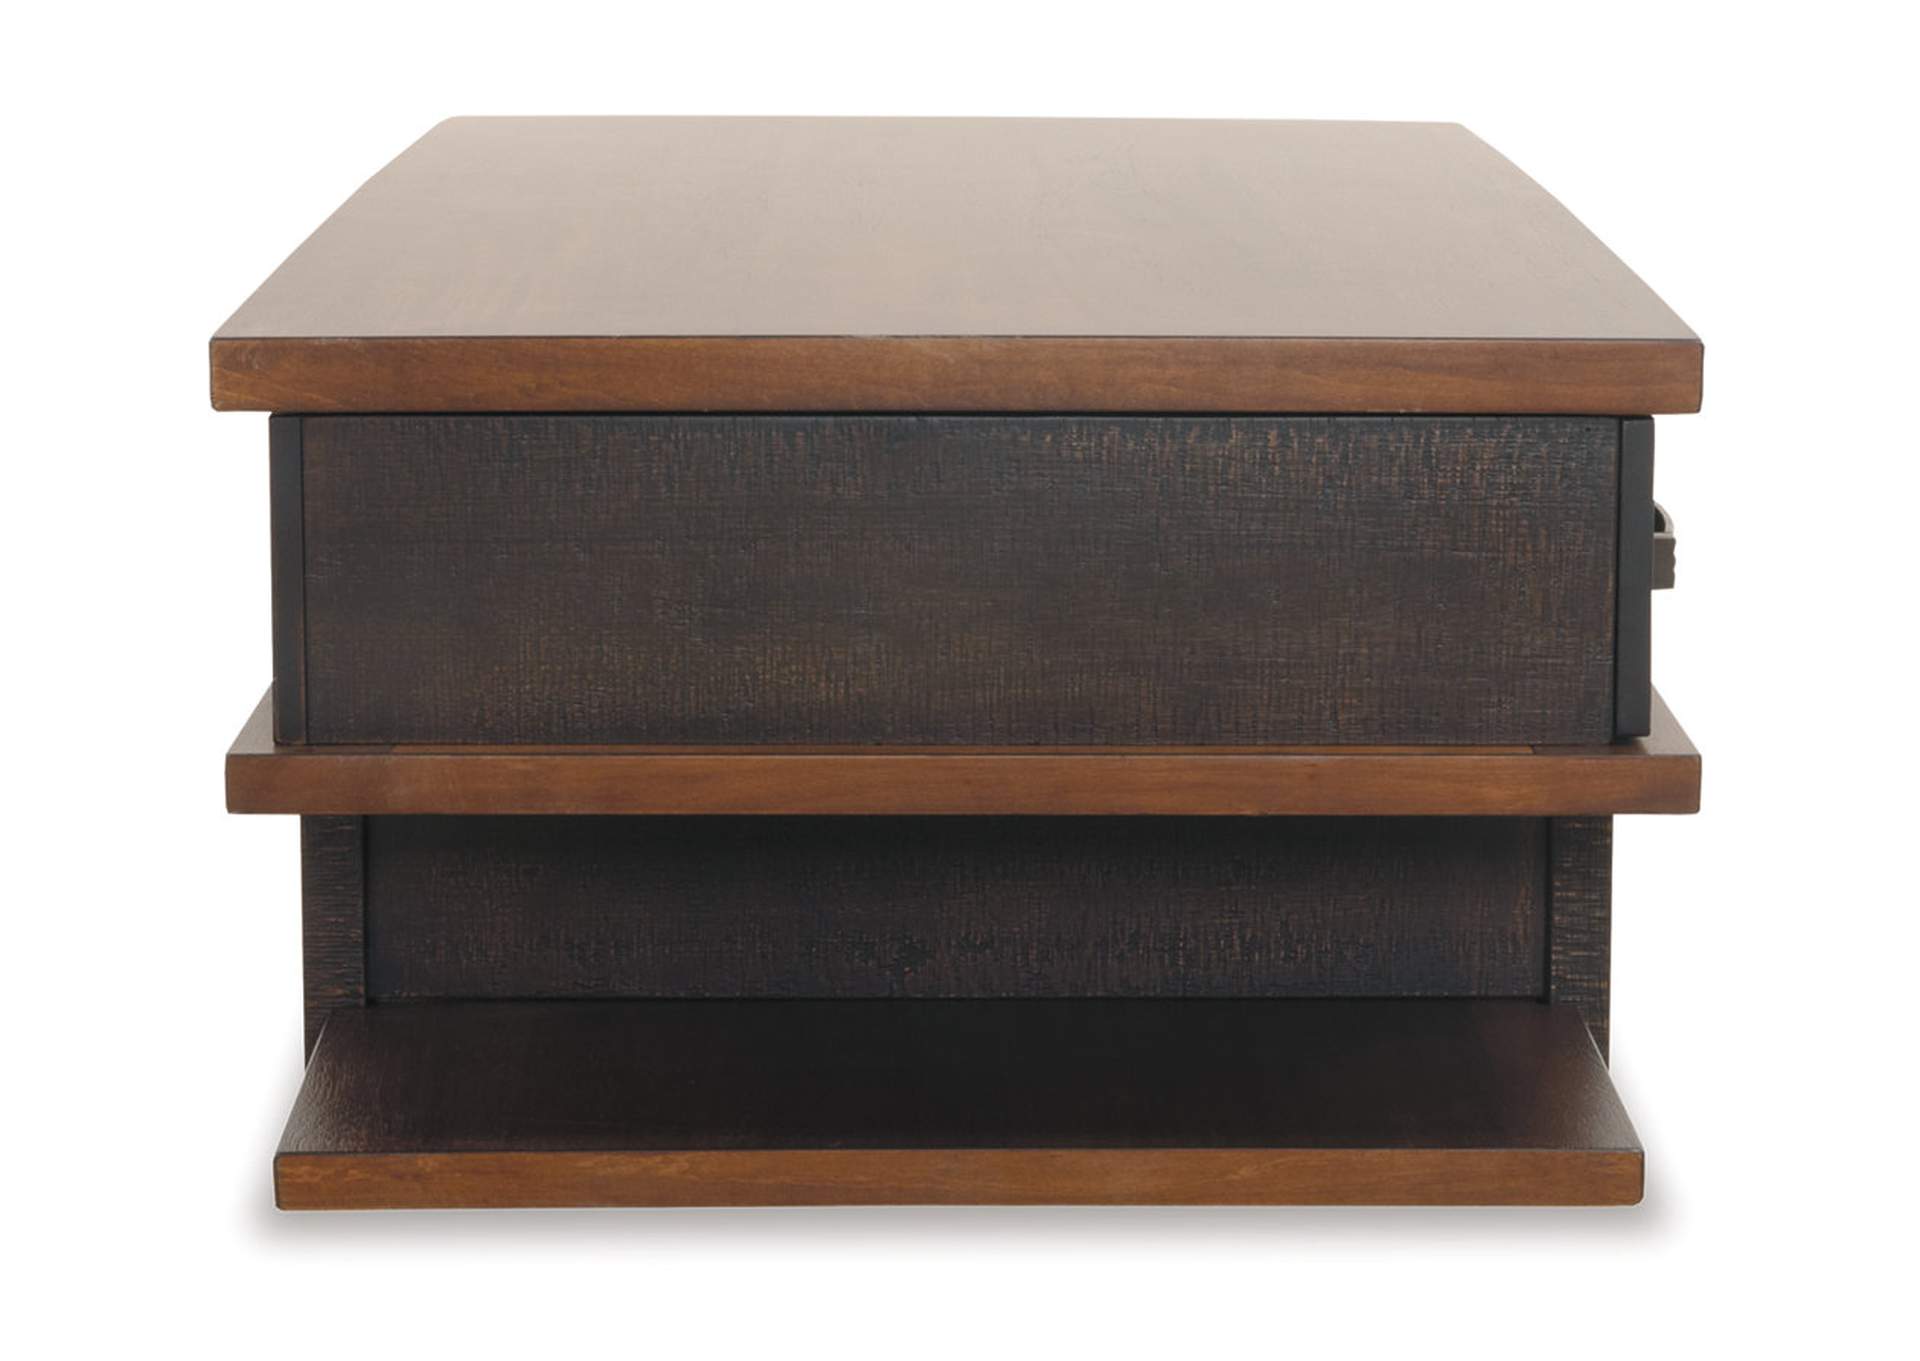 Stanah Coffee Table with Lift Top,Signature Design By Ashley